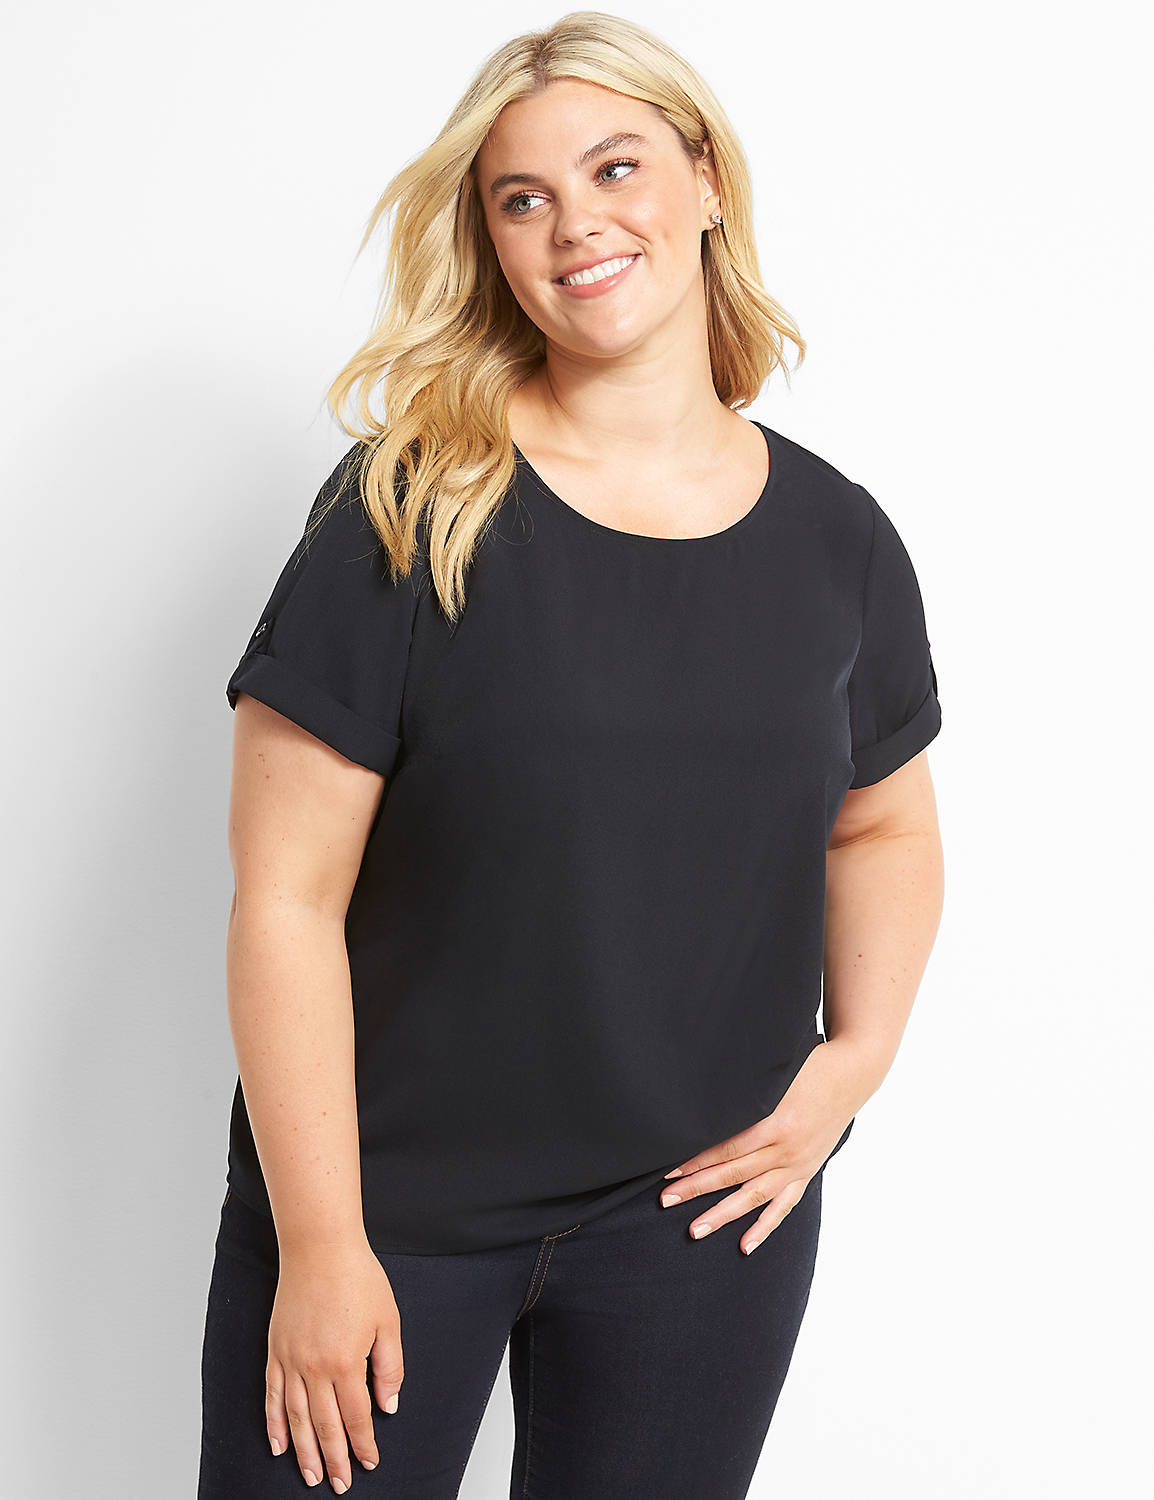 Short Sleeve Roll Cuff Crew Neck Top 1122473:Ascena Black:14 Product Image 1